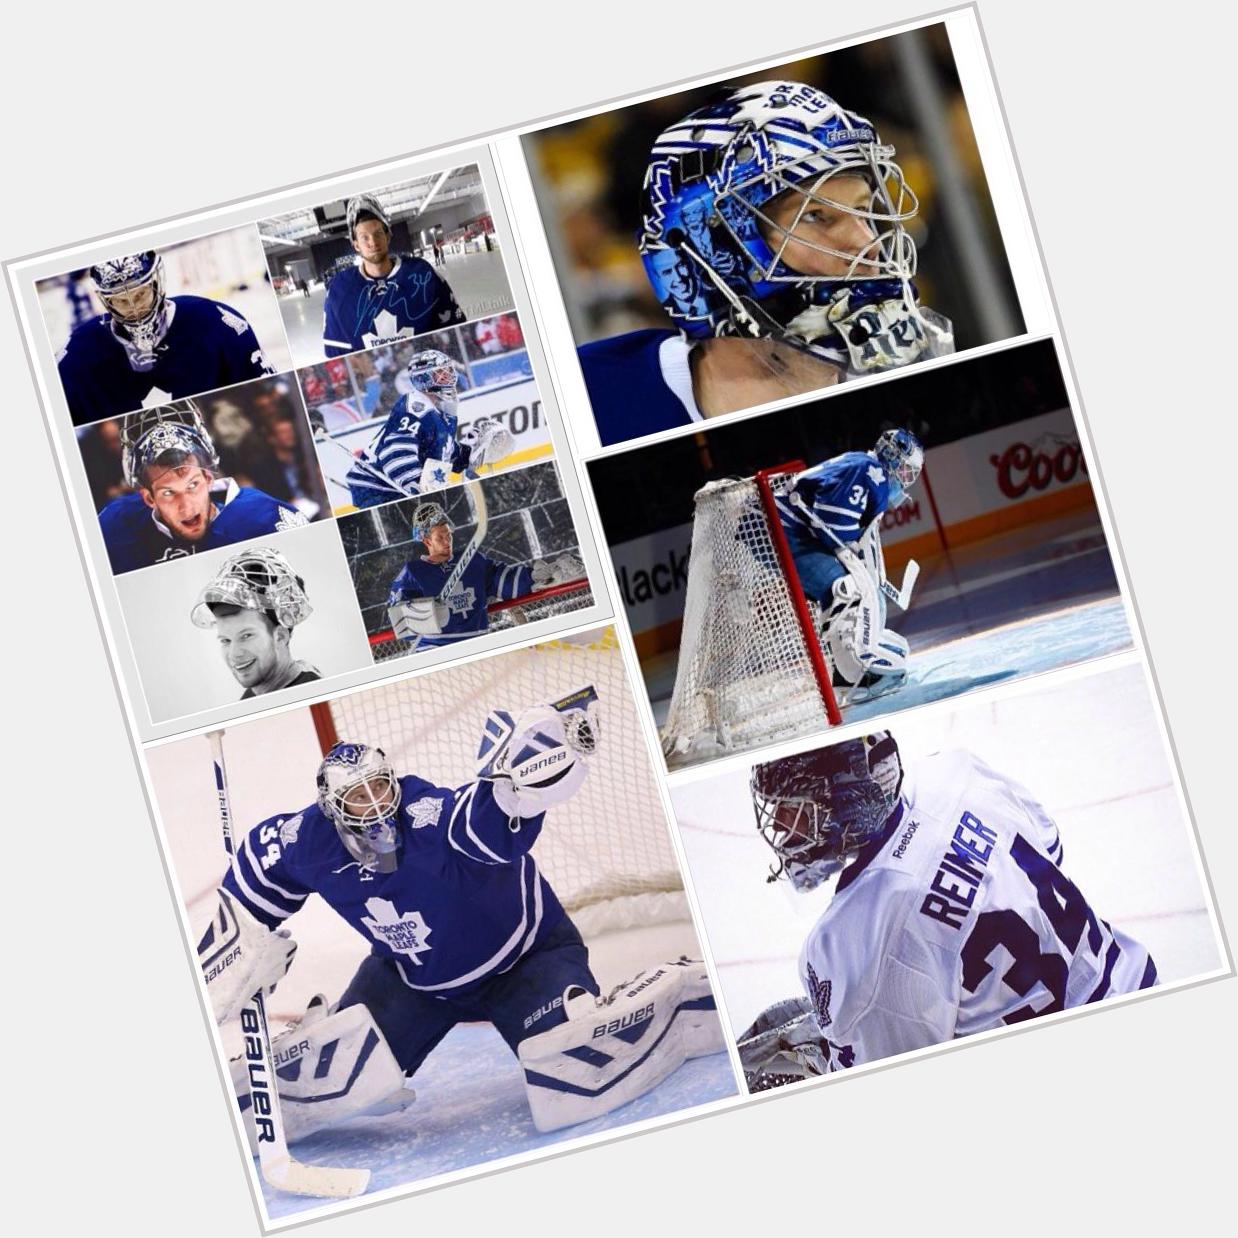 Happy birthday to the one guy I look up too, James Reimer. Have a good day buddy 